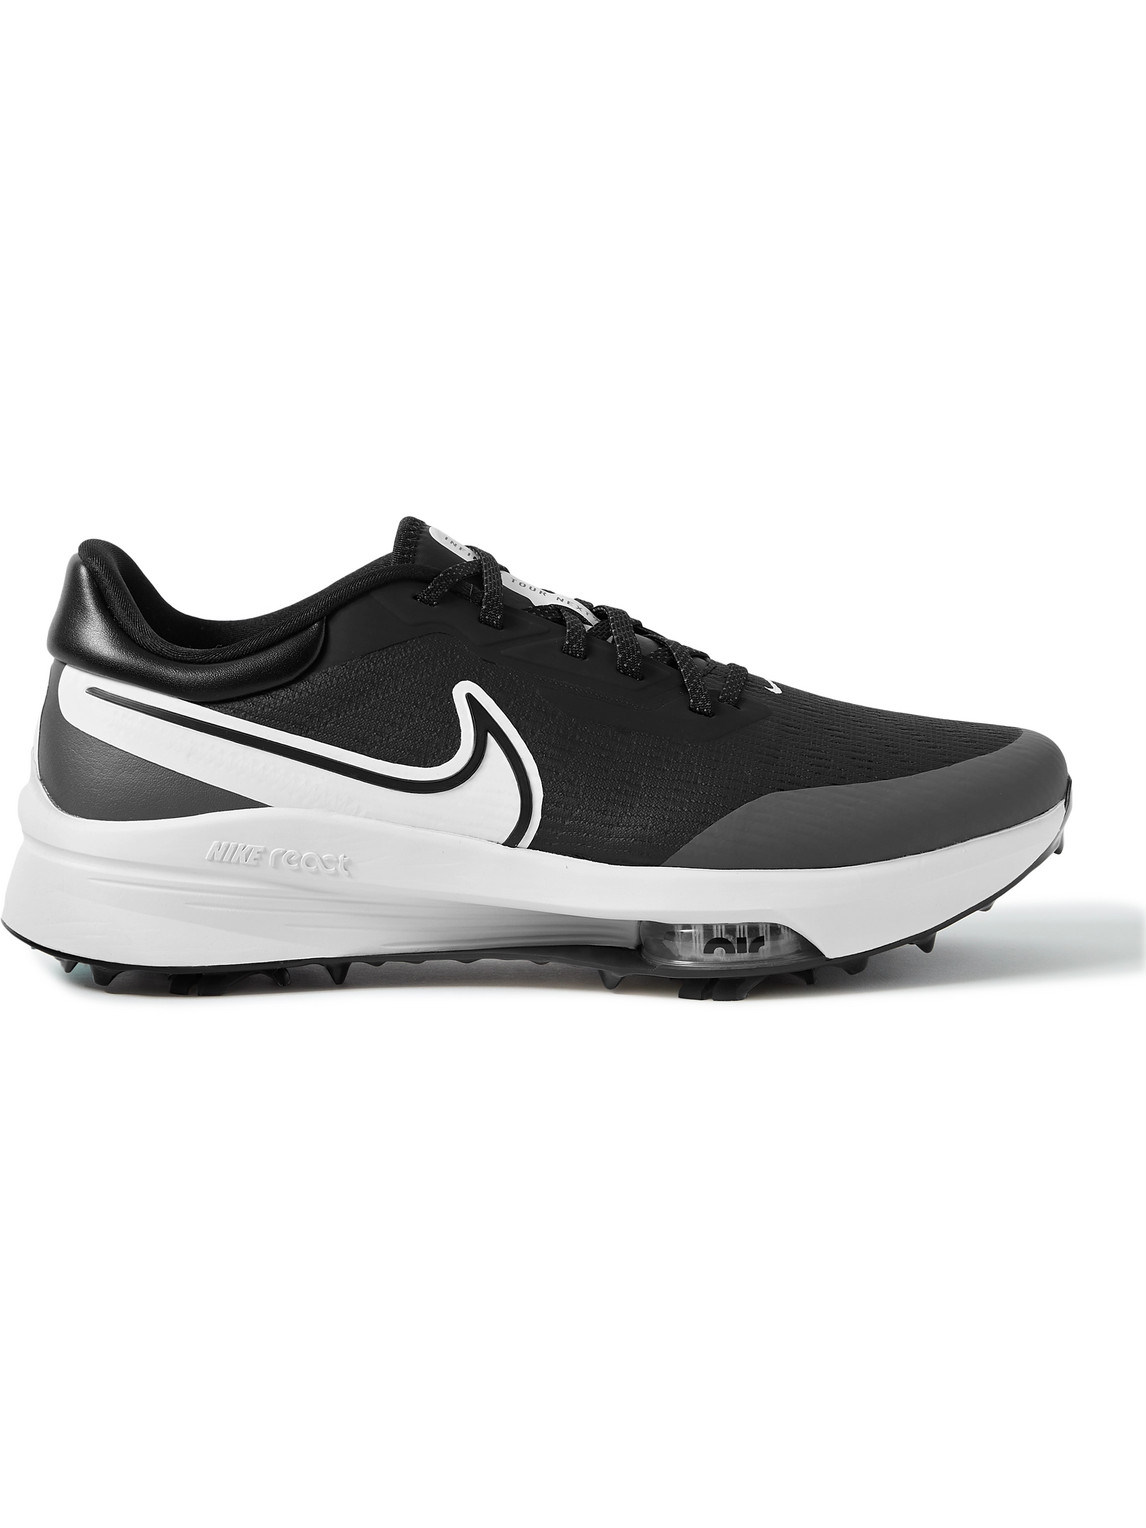 NIKE AIR ZOOM INFINITY TOUR RUBBER-TRIMMED FLYKNIT GOLF SHOES